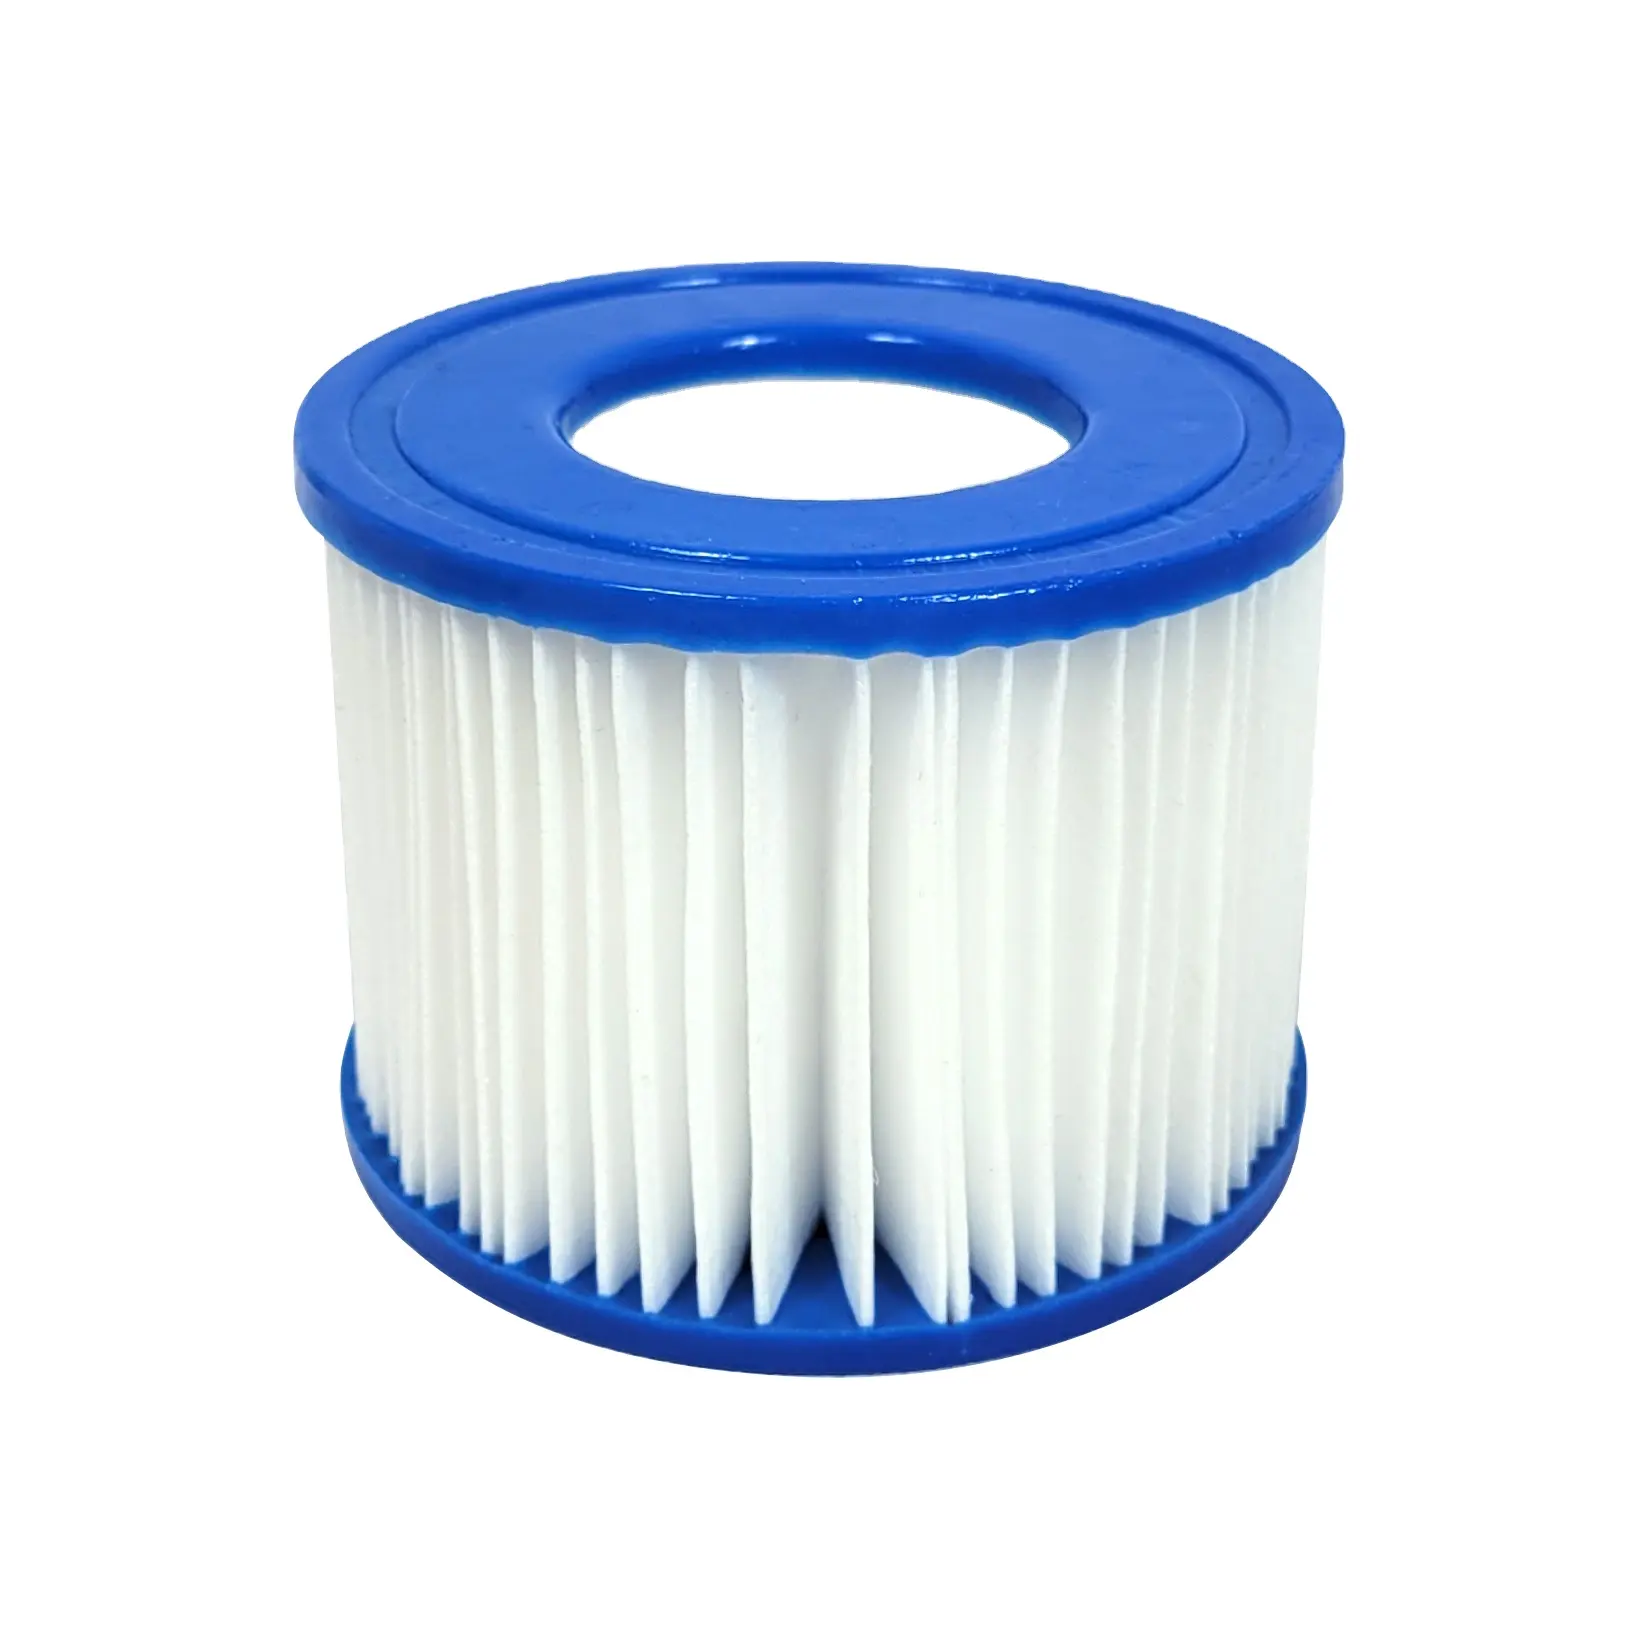 Type VI Spa Filter Replacement Cartridge for SaluSpa Lay-Z-Spa Saluspa Filter 90352E Best way VI Inflatable Swimming Pool Filter